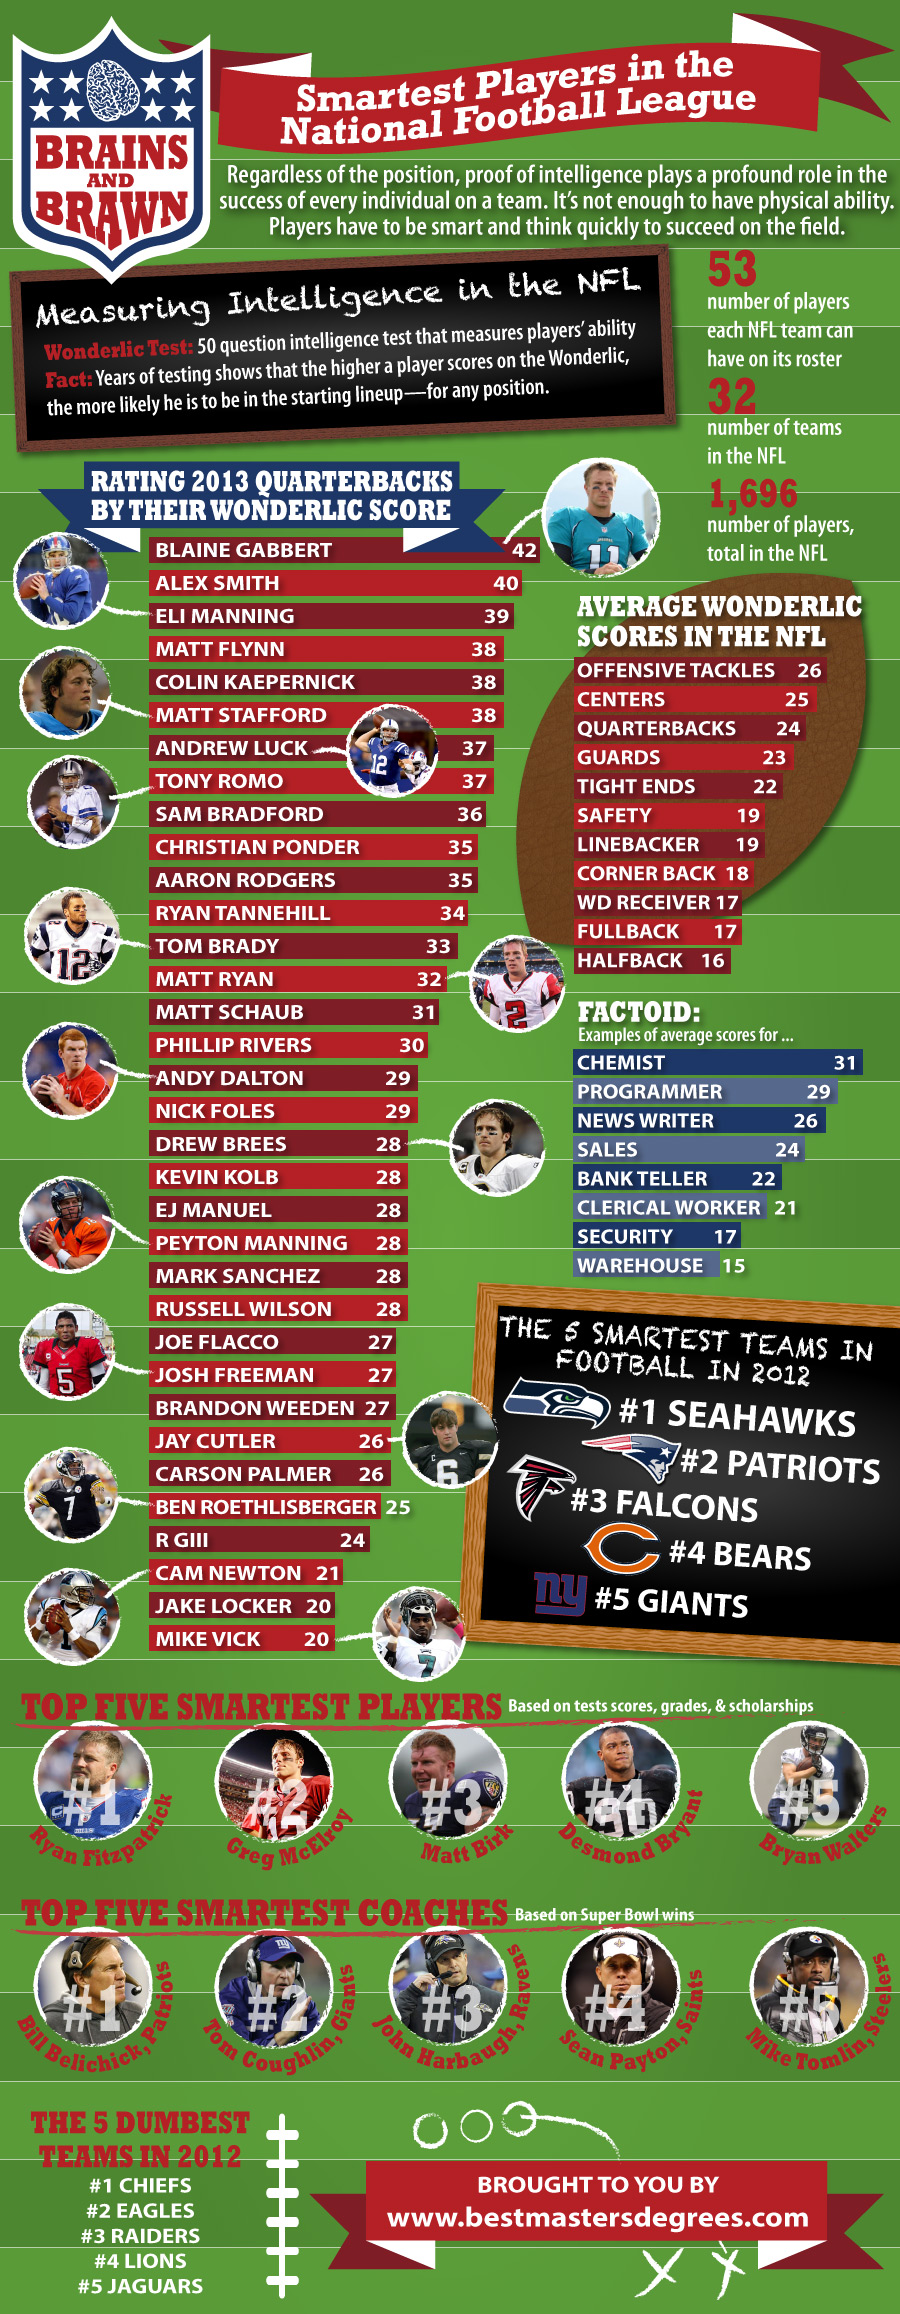 NFL Player Abilities and Unique Qualities